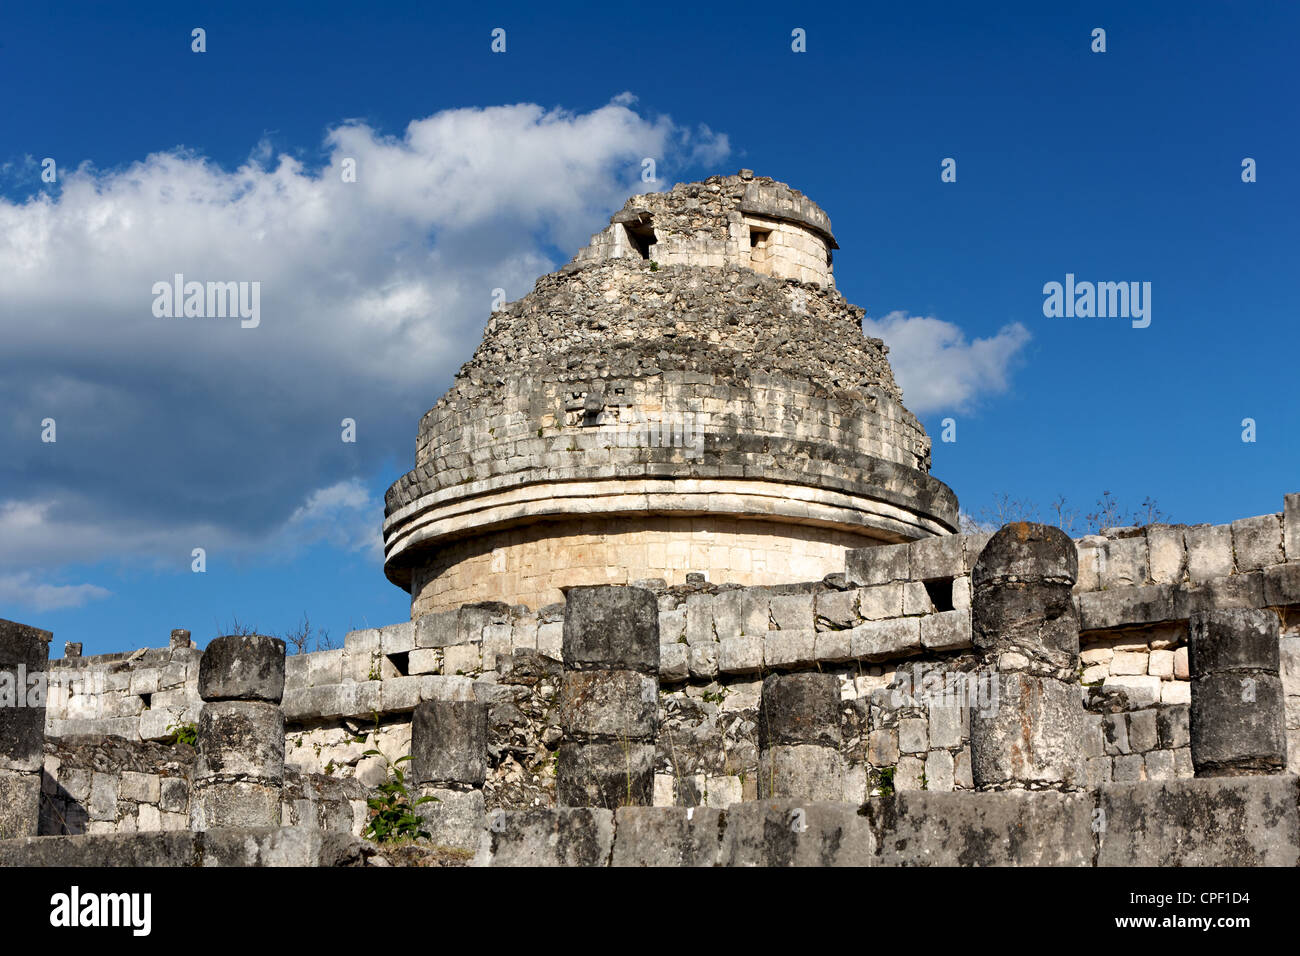 Mayan ruin thought to be an observatory at the archeological site of Chichen Itza, Mexico. Stock Photo